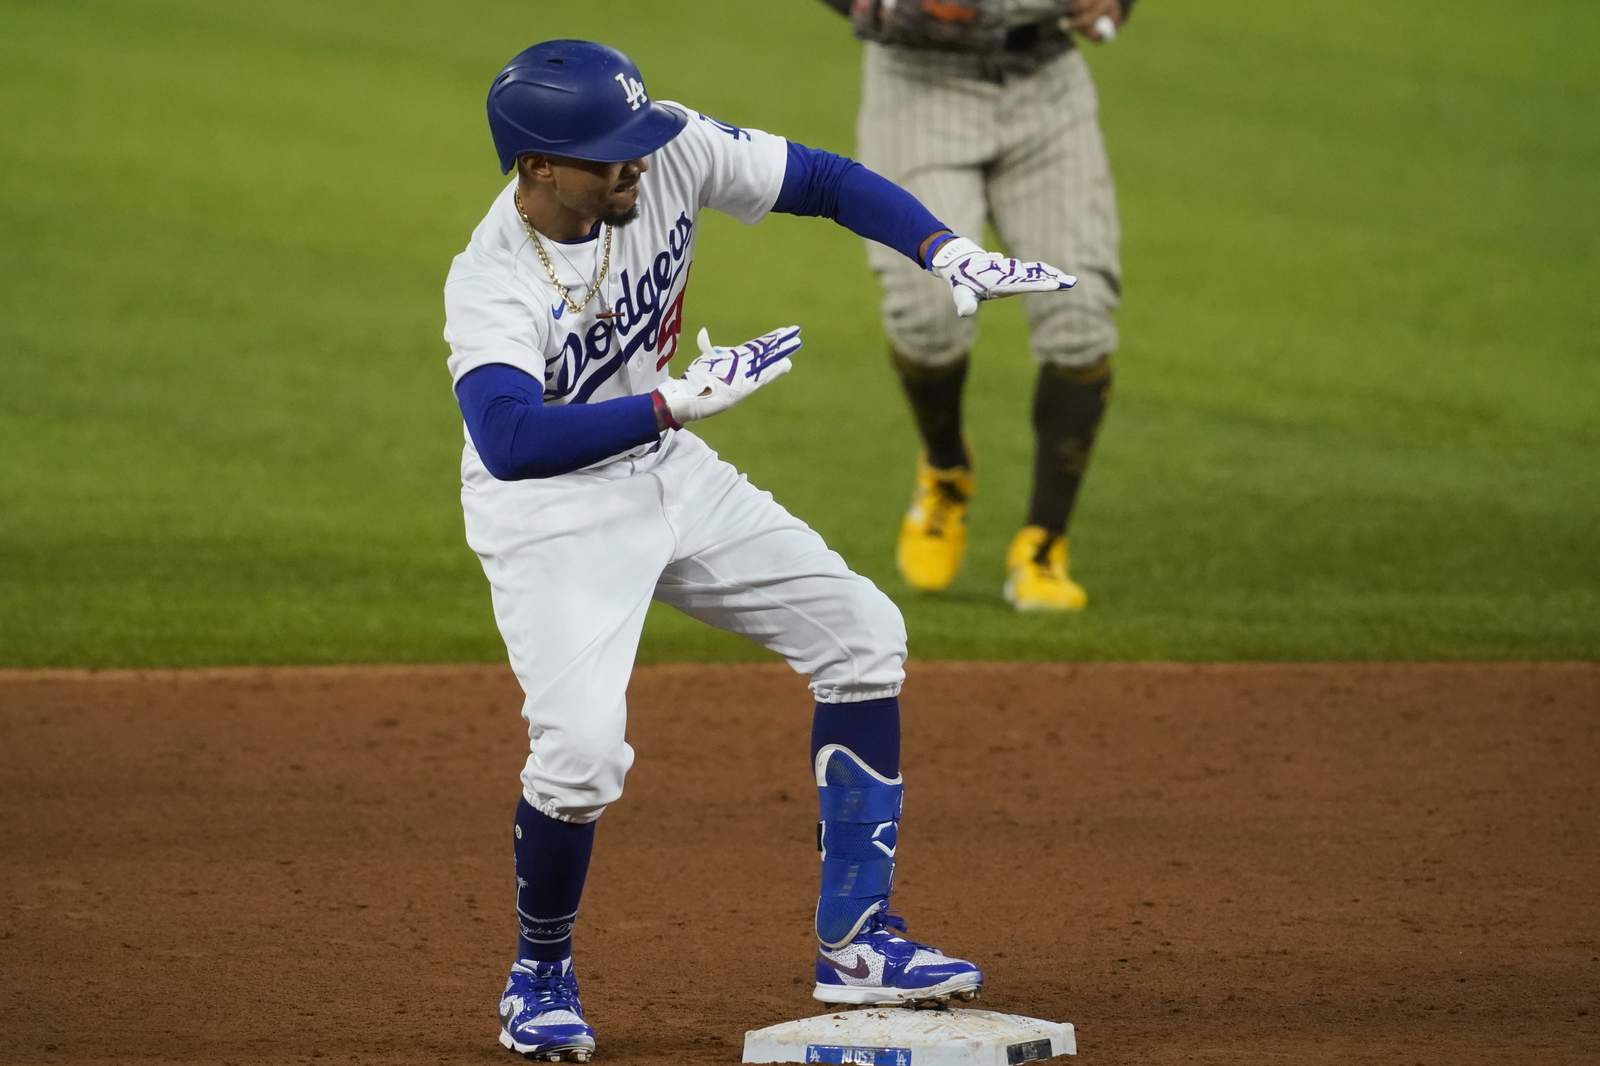 Walk in new park: Dodgers open NLDS with 5-1 win over Padres